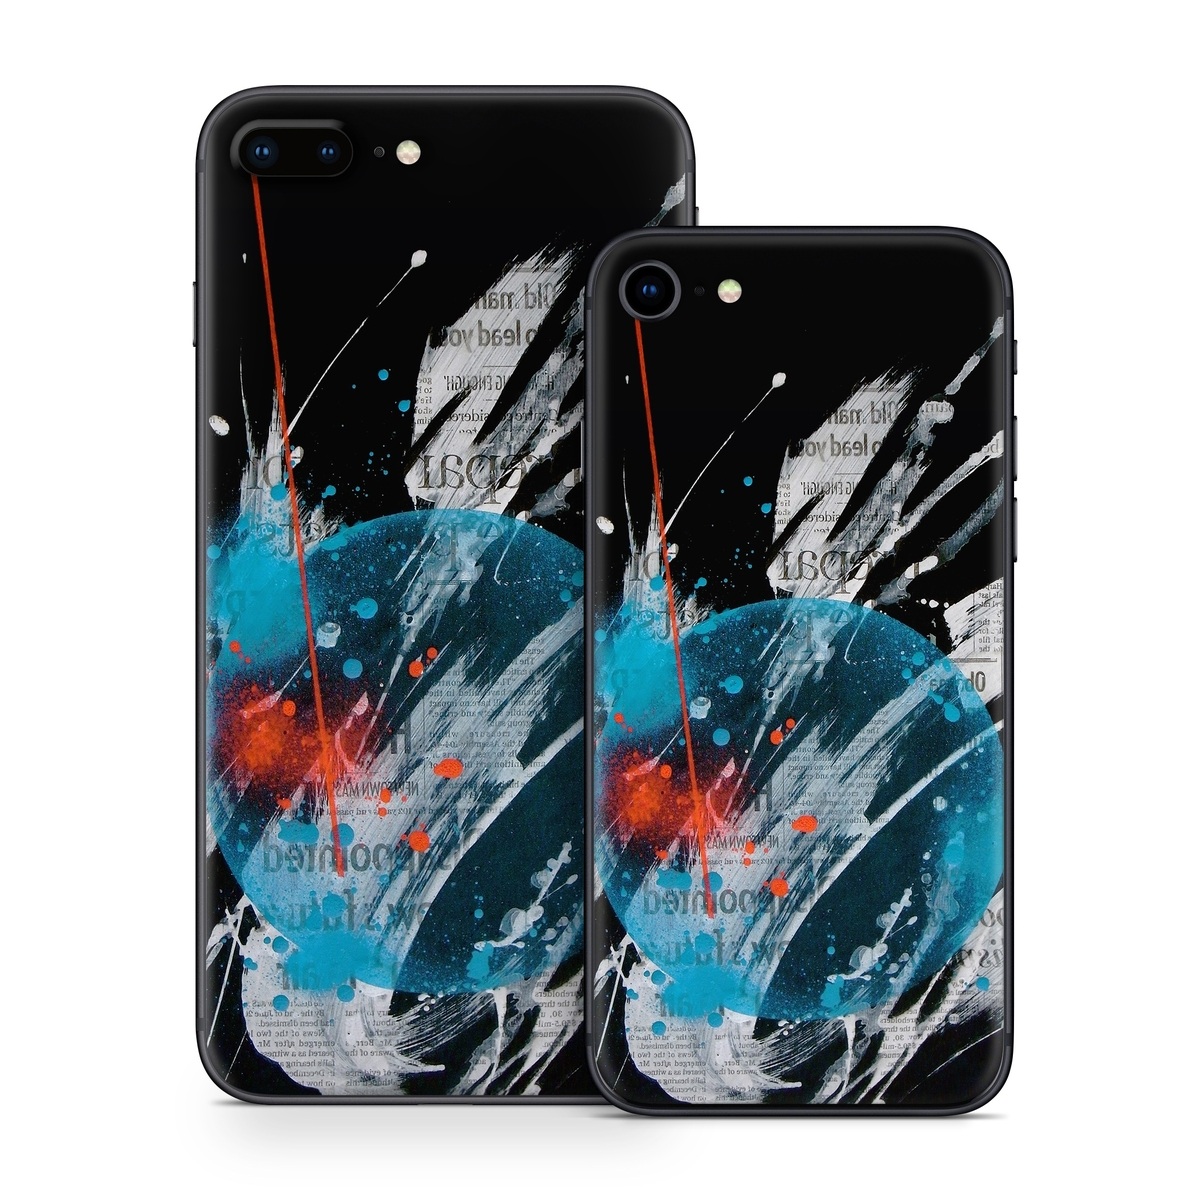 iPhone 8 Series Skin design of Graphic design, Illustration, Graphics, Design, Art, Space, World, with black, gray, blue, red colors